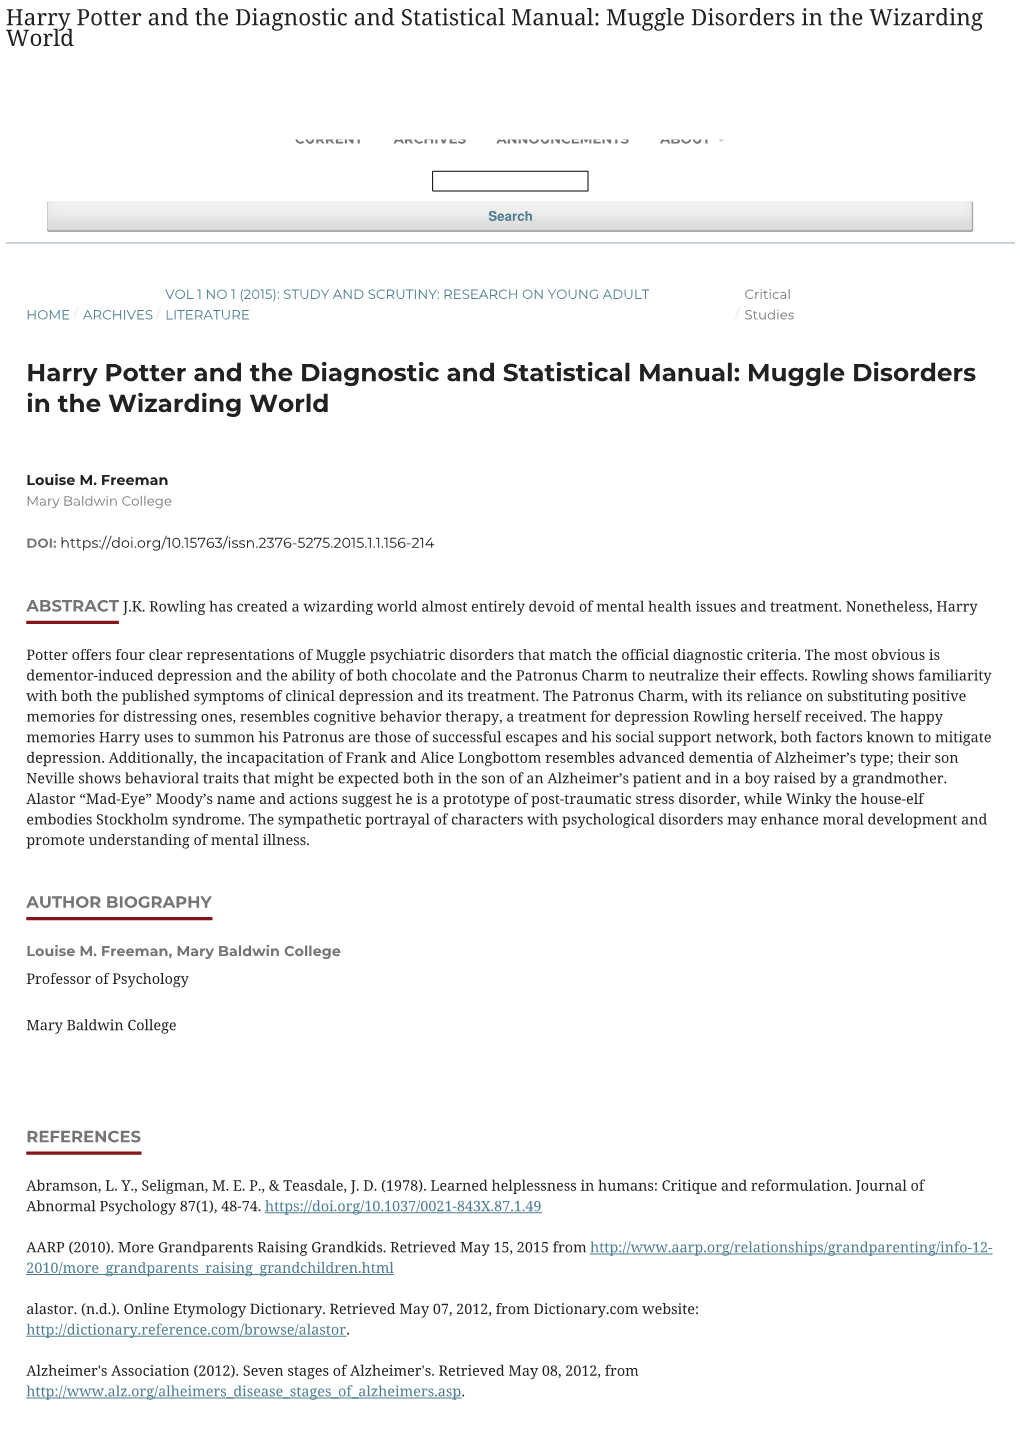 Harry Potter and the Diagnostic and Statistical Manual: Muggle Disorders in Ther Wegiisztear R Dlionggin World STUDY and SCRUTINY: RESEARCH on YOUNG ADULT LITERATURE